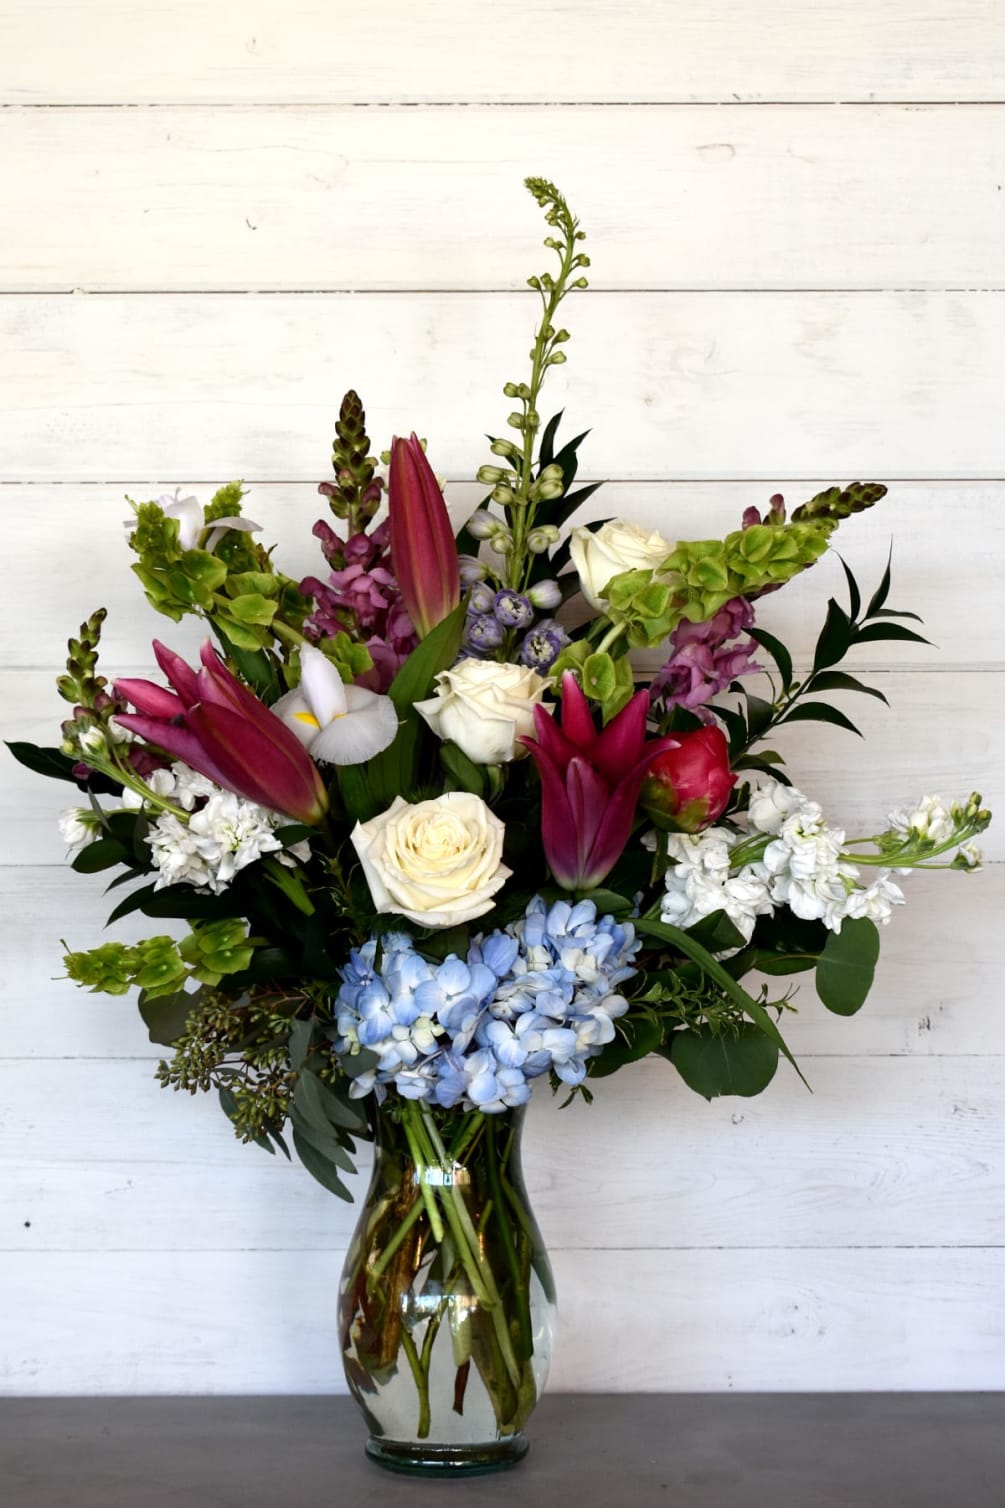 This arrangement is a beautiful English garden featuring a mix of roses